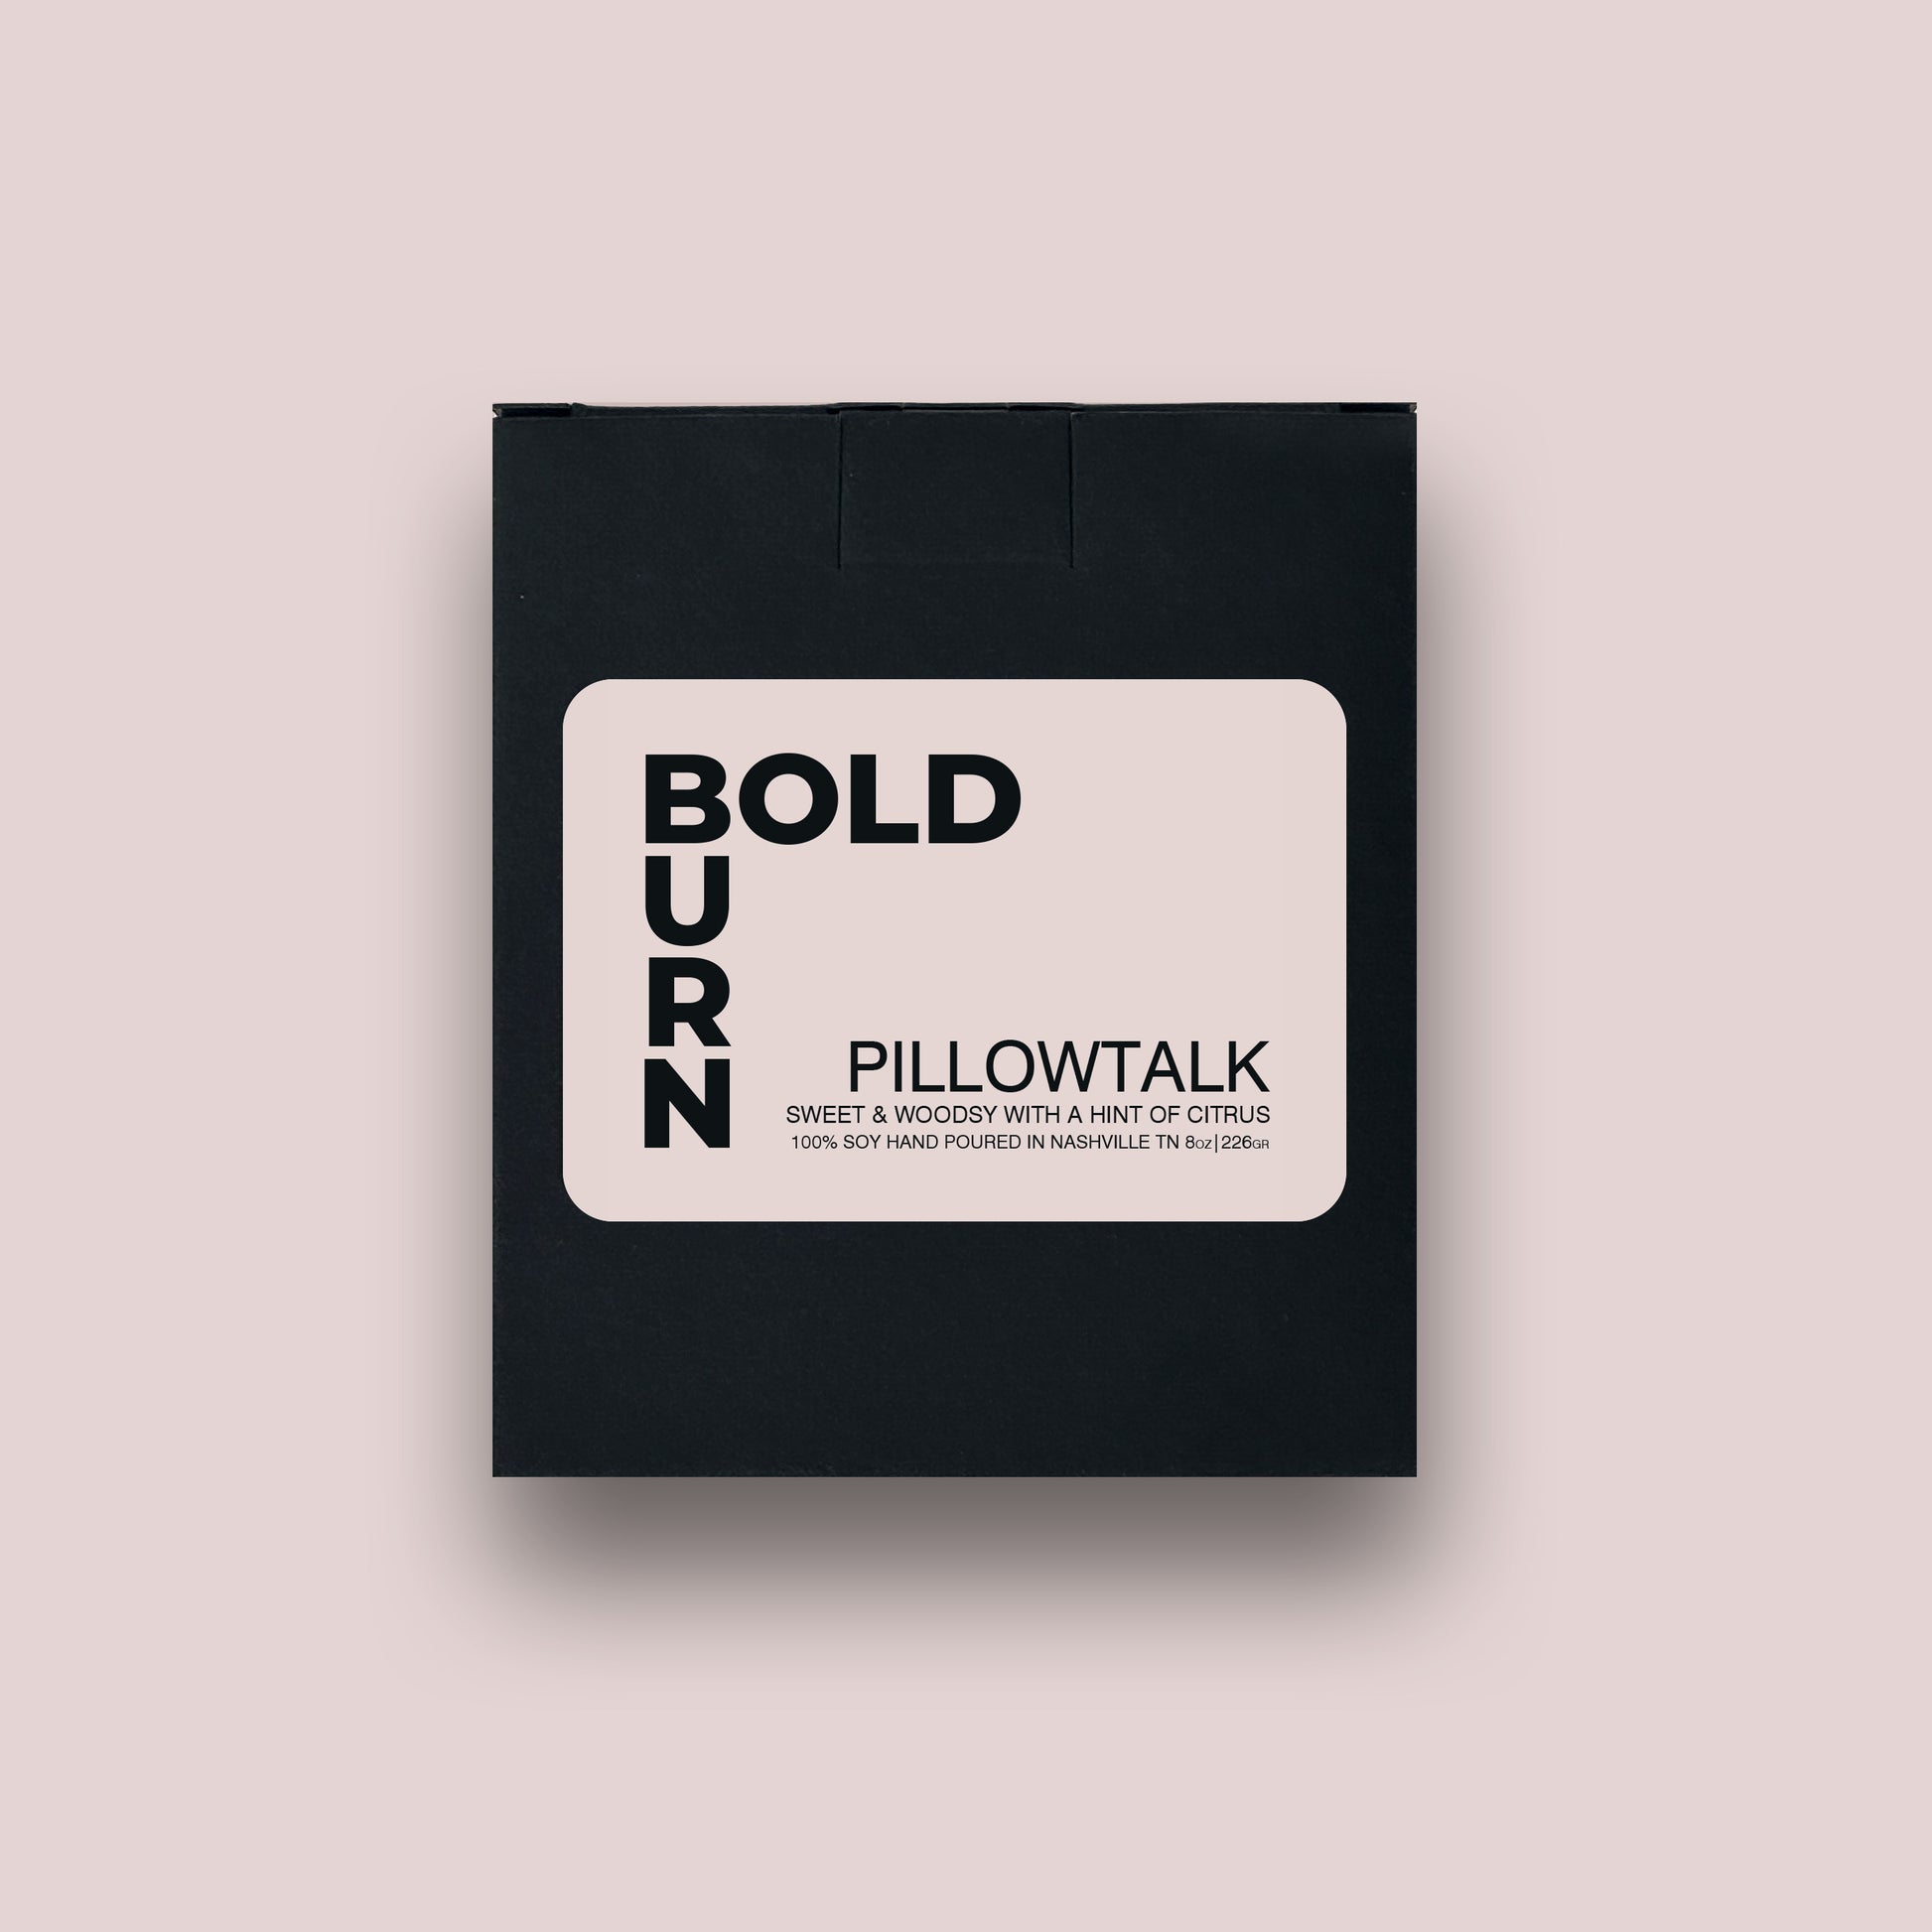 Bold Burn Pillowtalk black gift box with white label containing Bold Burn logo and candle name